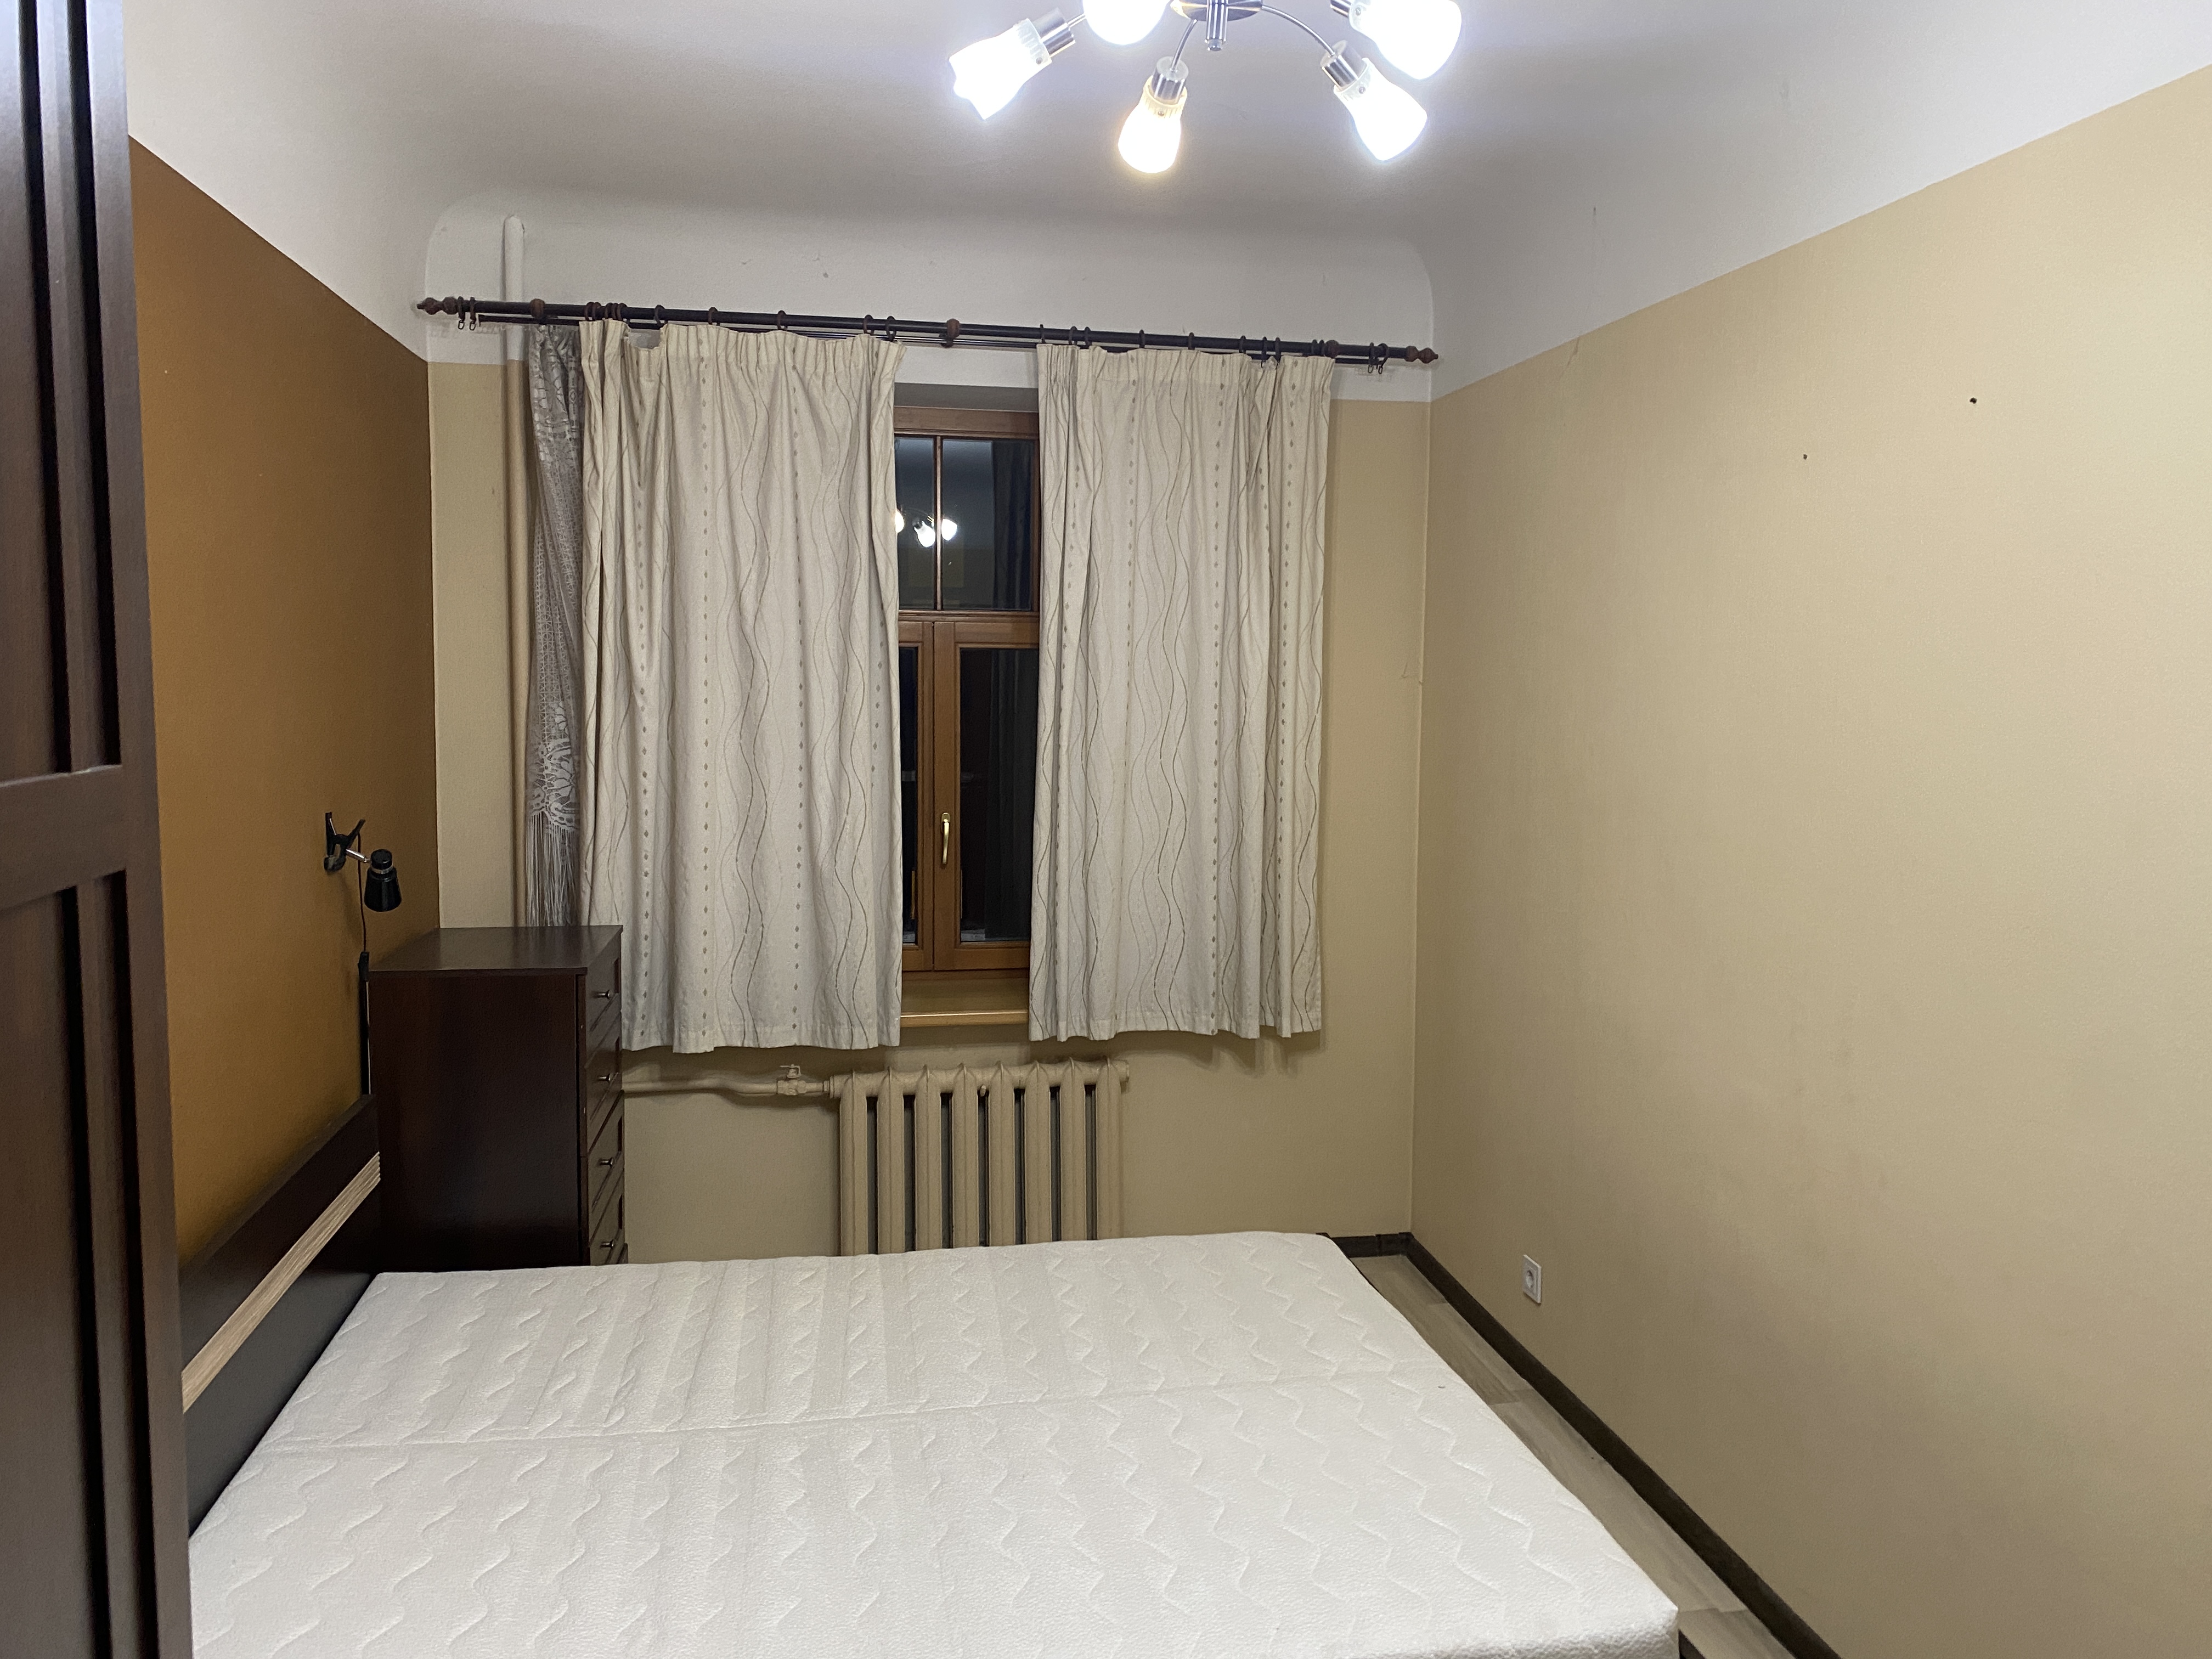 Apartment for rent, Stabu street 70 - Image 1